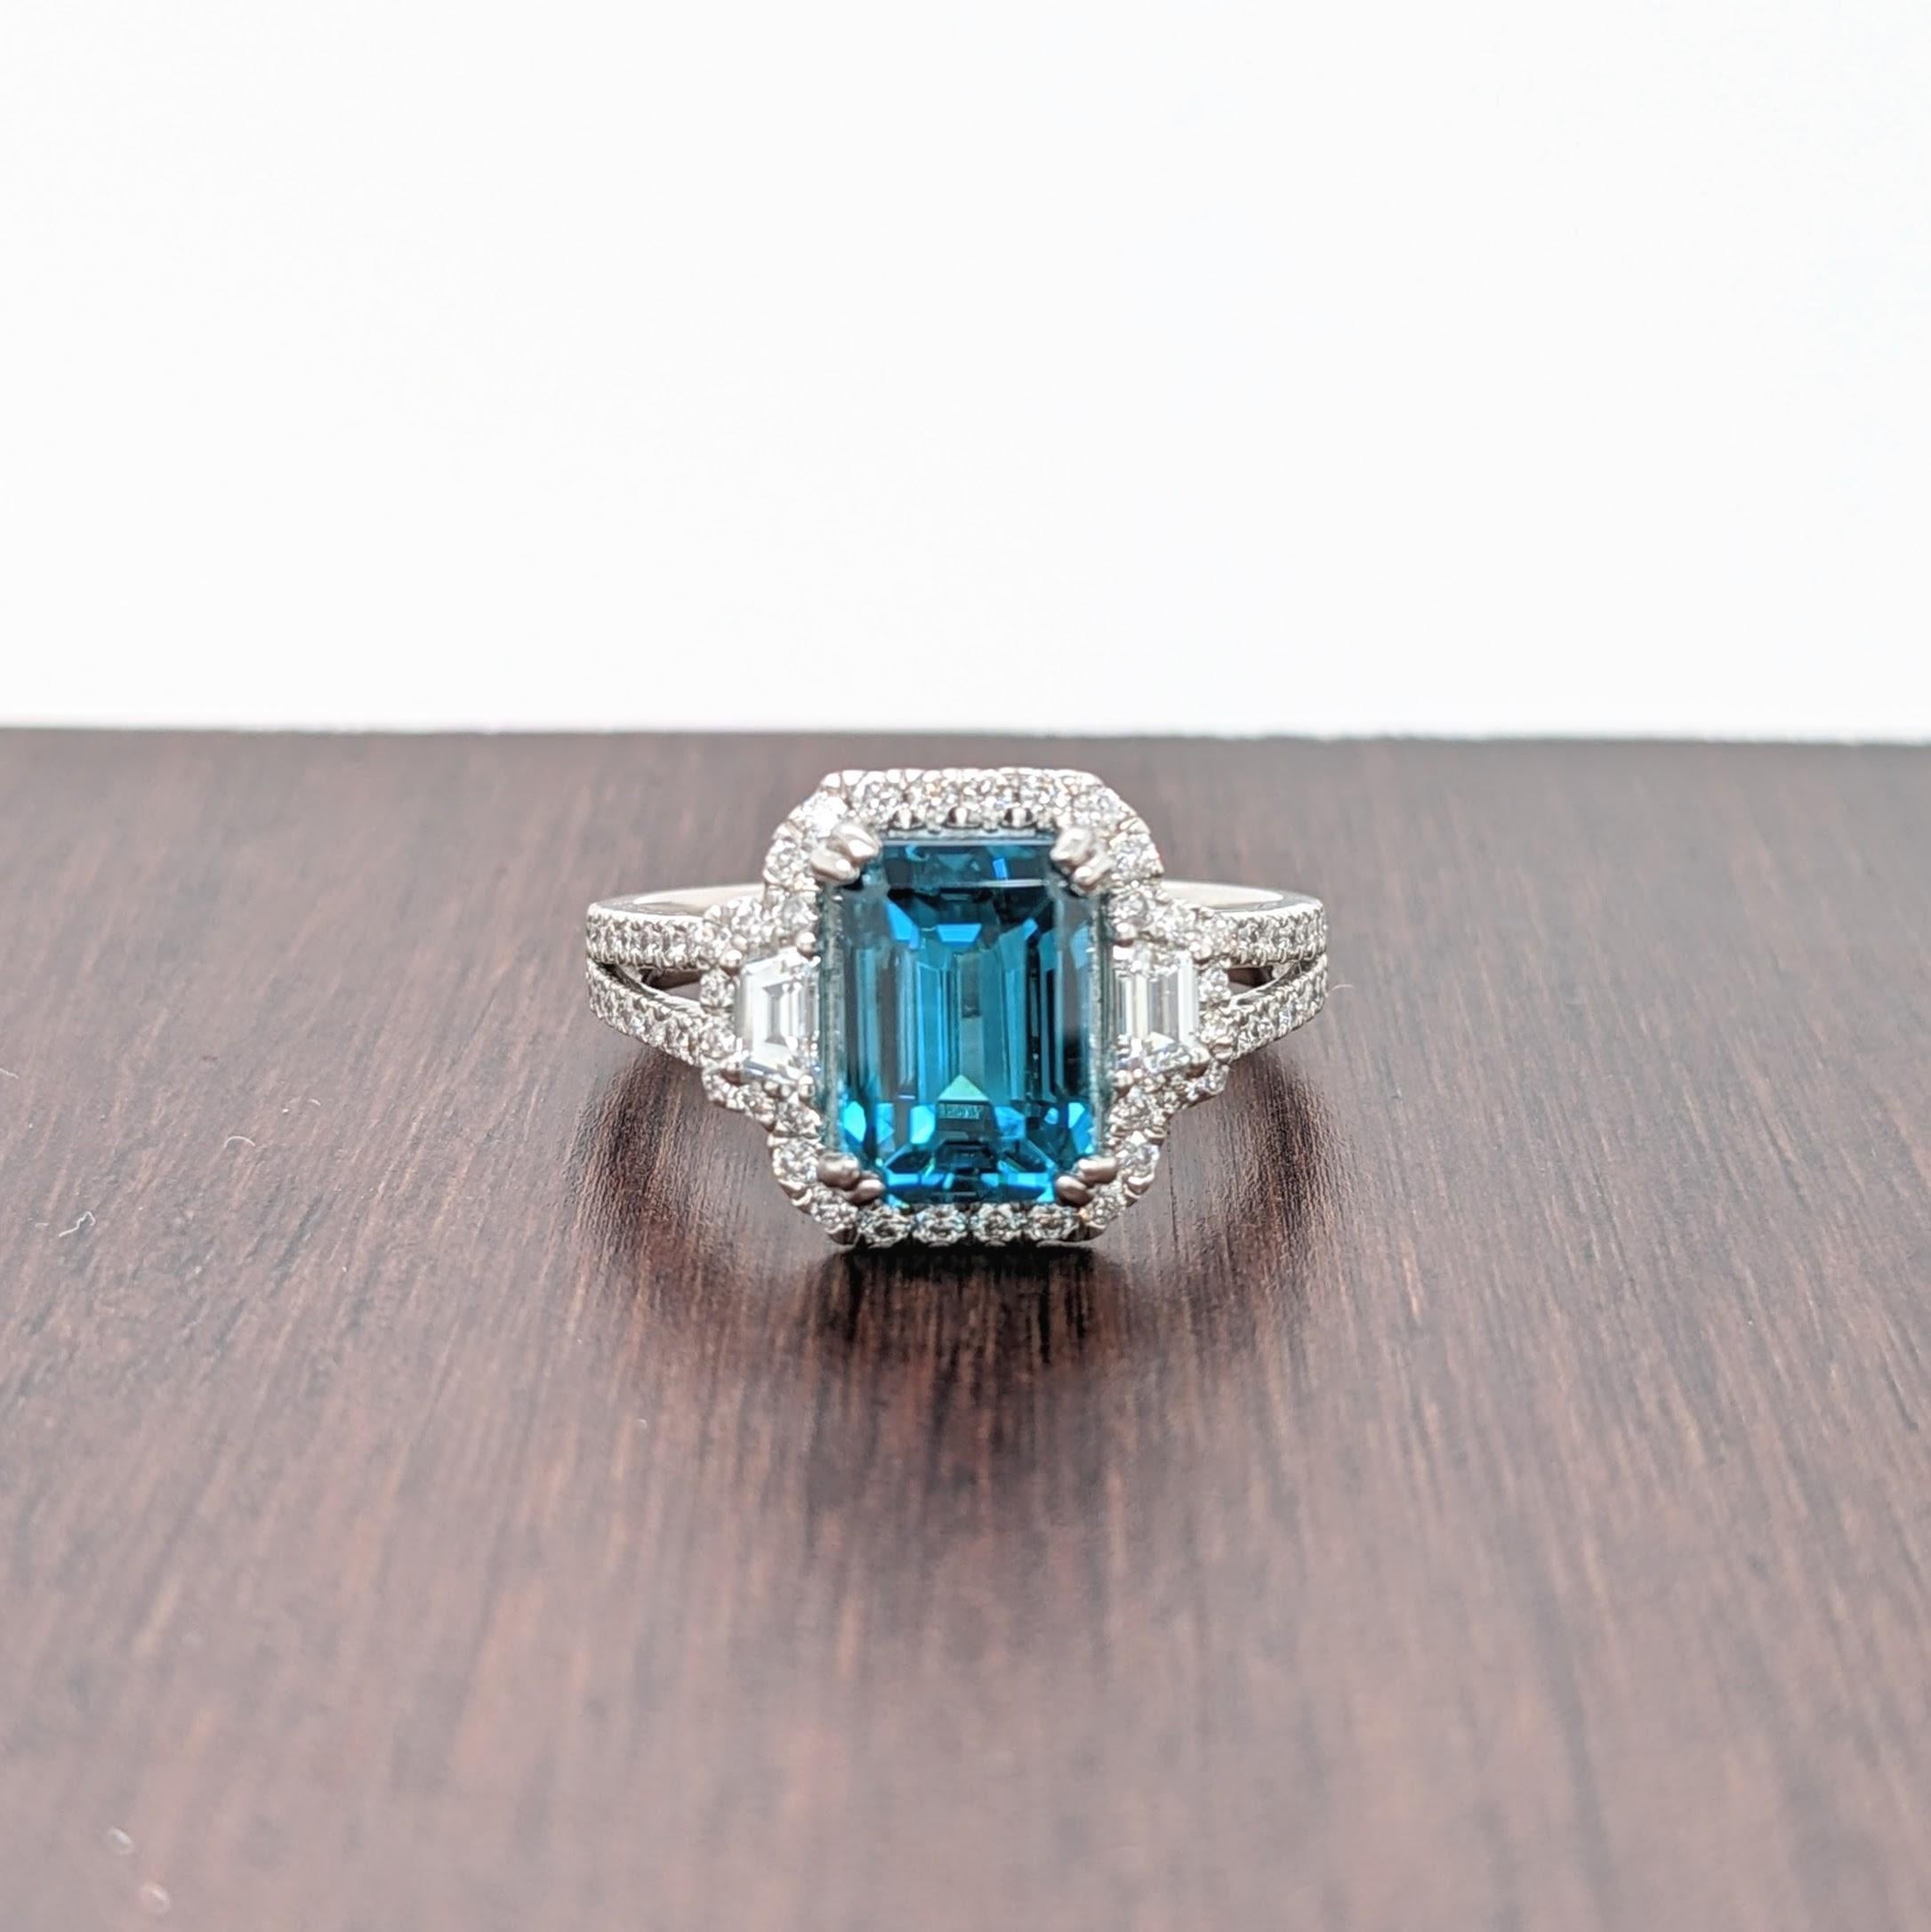 Claim this captivating natural blue zircon for yourself or your loved ones! A masterpiece of nature set in one of our most popular NNJ ring designs made in 14K white gold with a diamond halo and diamond studded split shank. A gorgeous ring for a